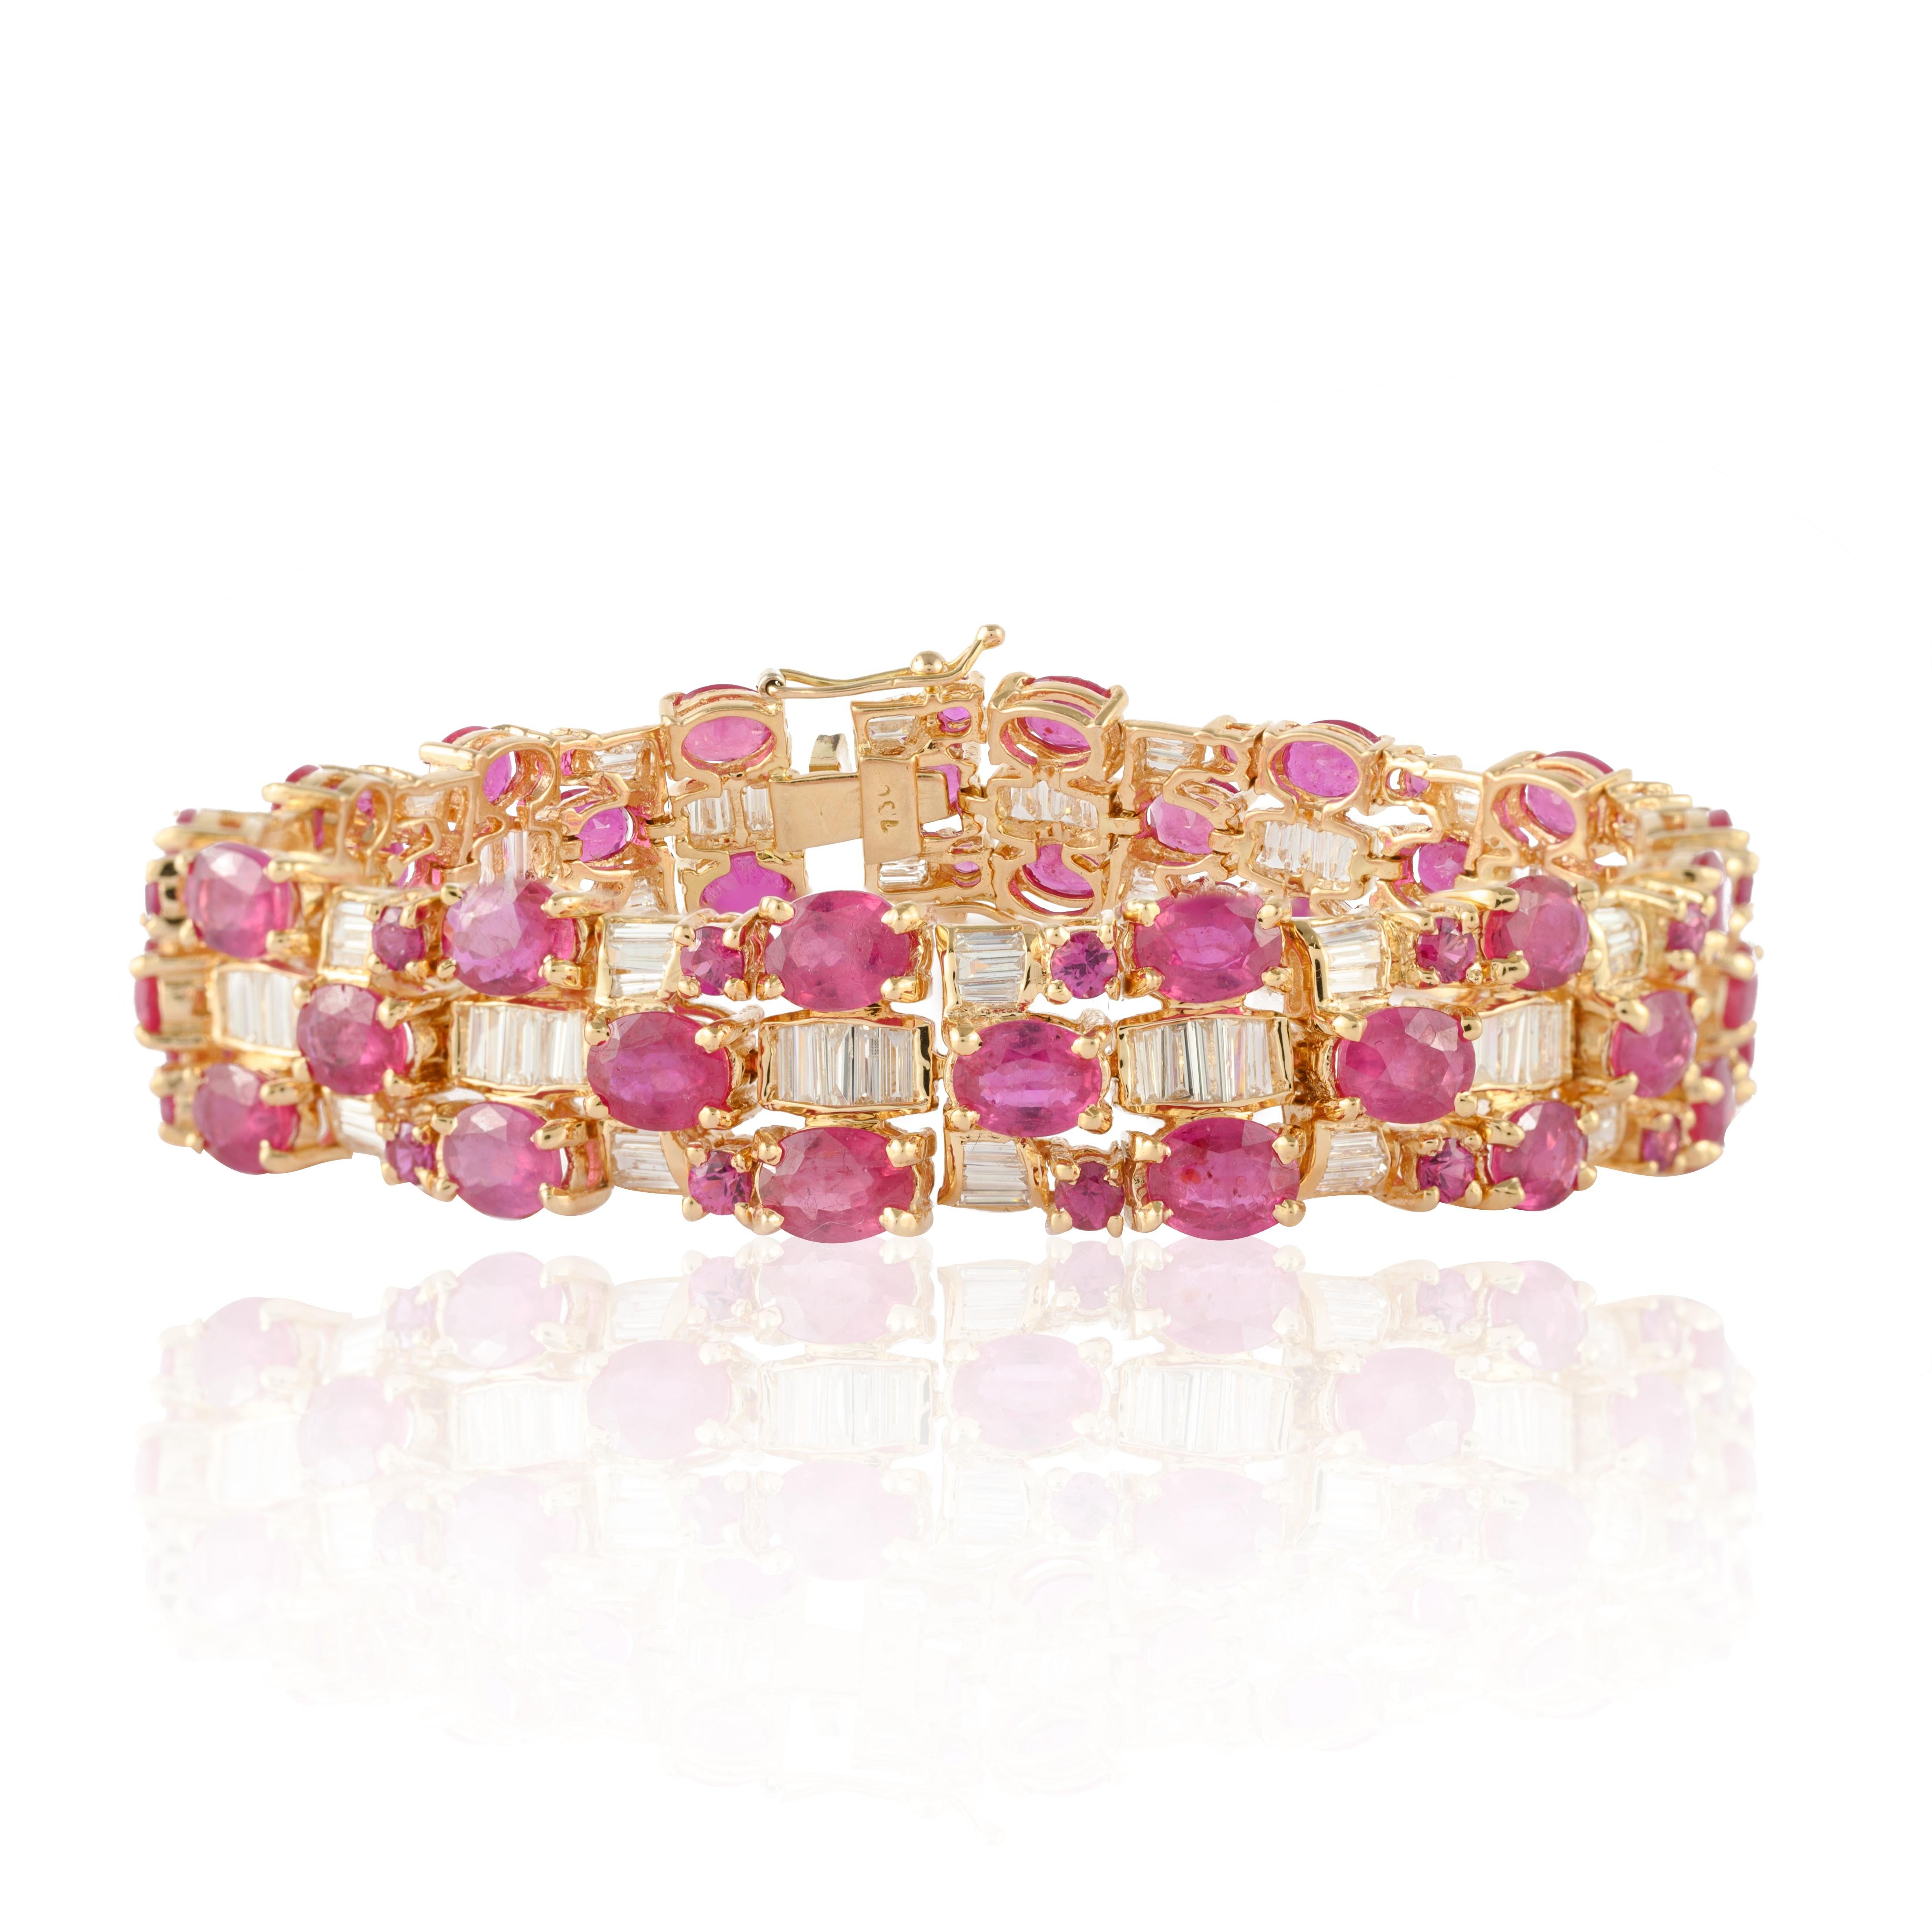 Women's 29.88 Carat Natural Ruby Art Deco Diamond Bracelet in 18k Solid Yellow Gold For Sale